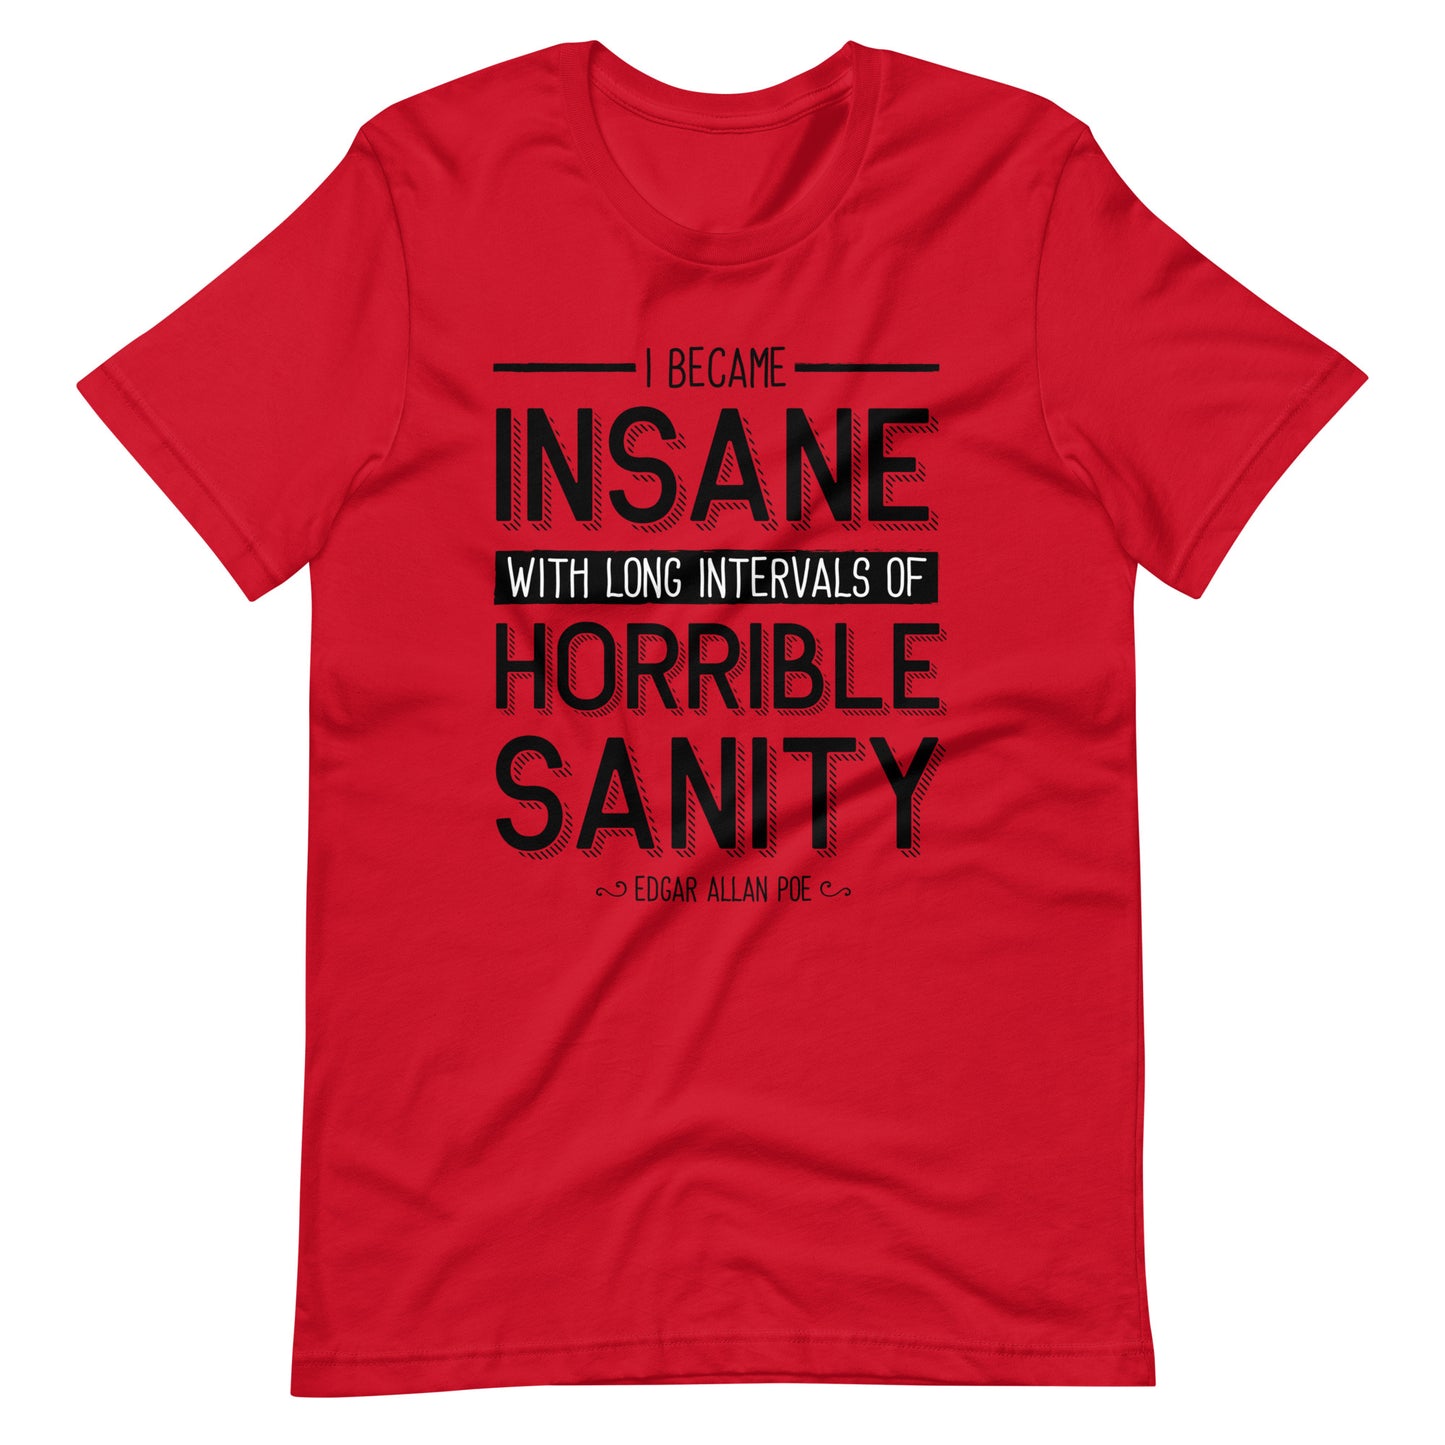 I Became Insane Edgar Allan Poe Quote - Men's t-shirt - Red Front